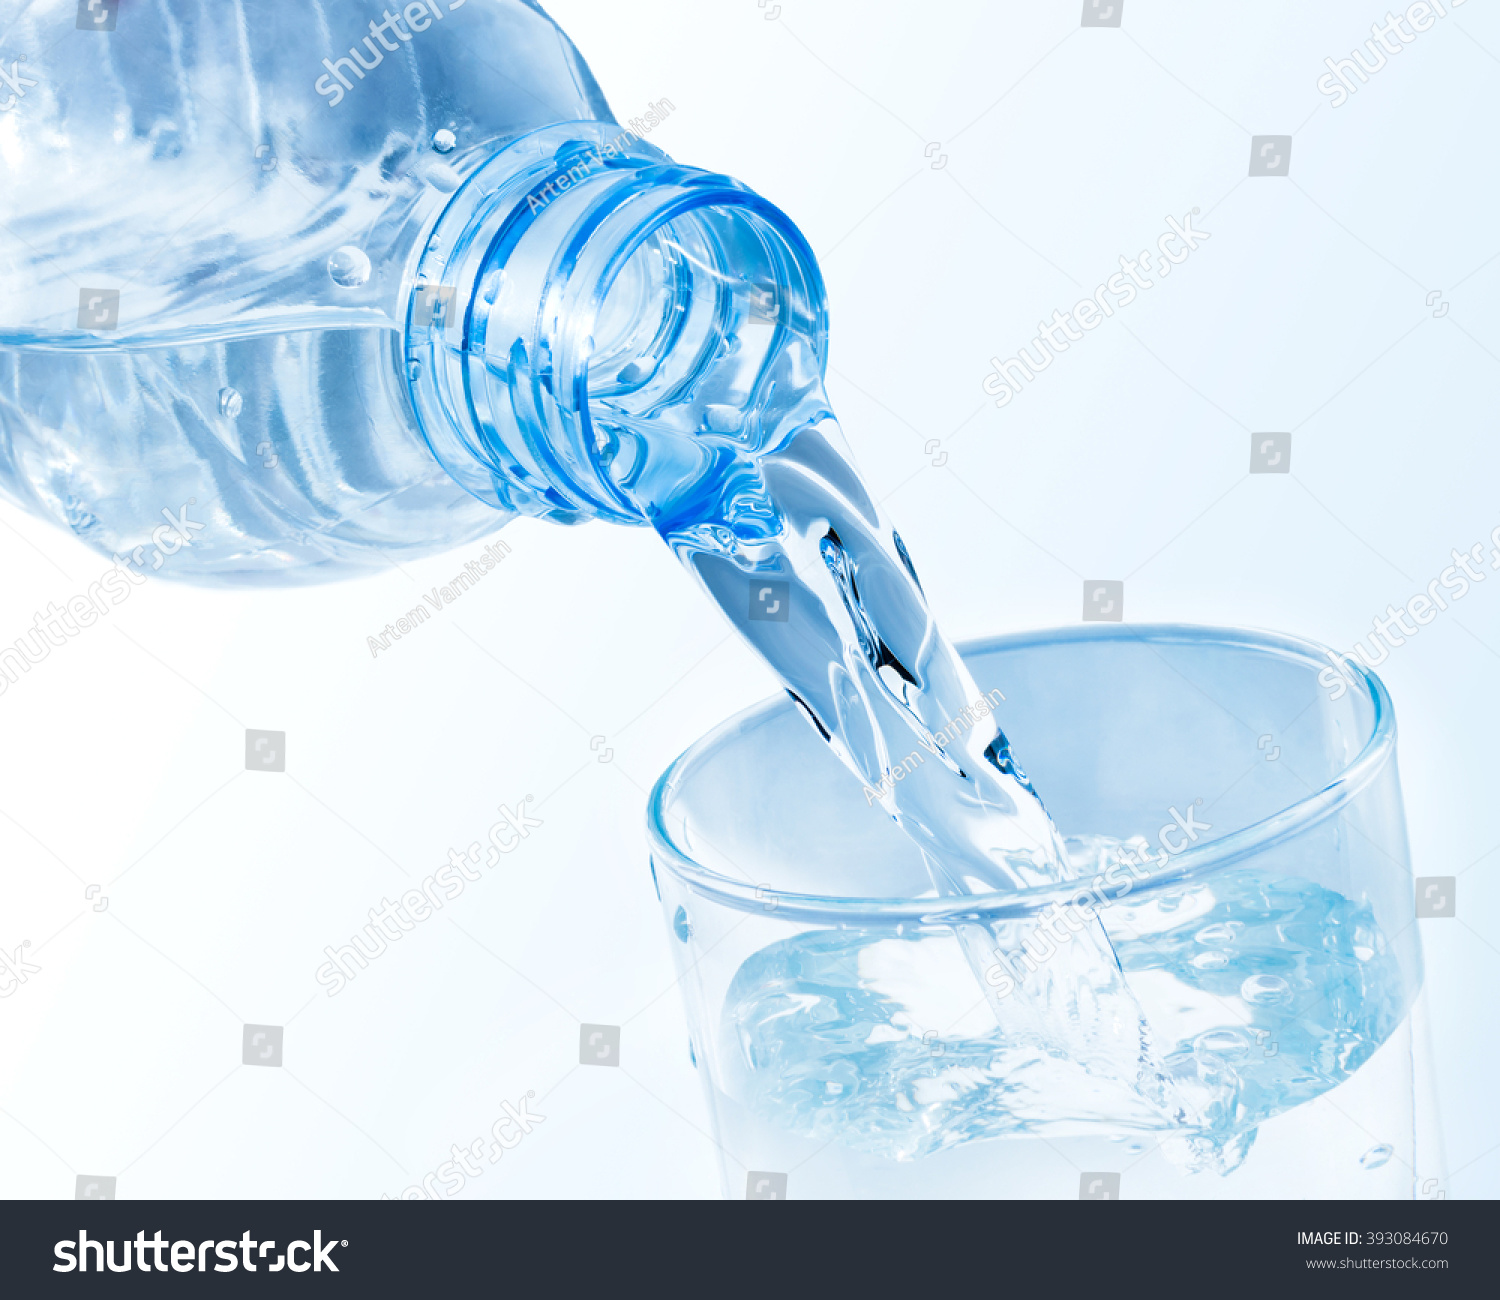 Pouring clean water from plastic bottle into a glass #393084670